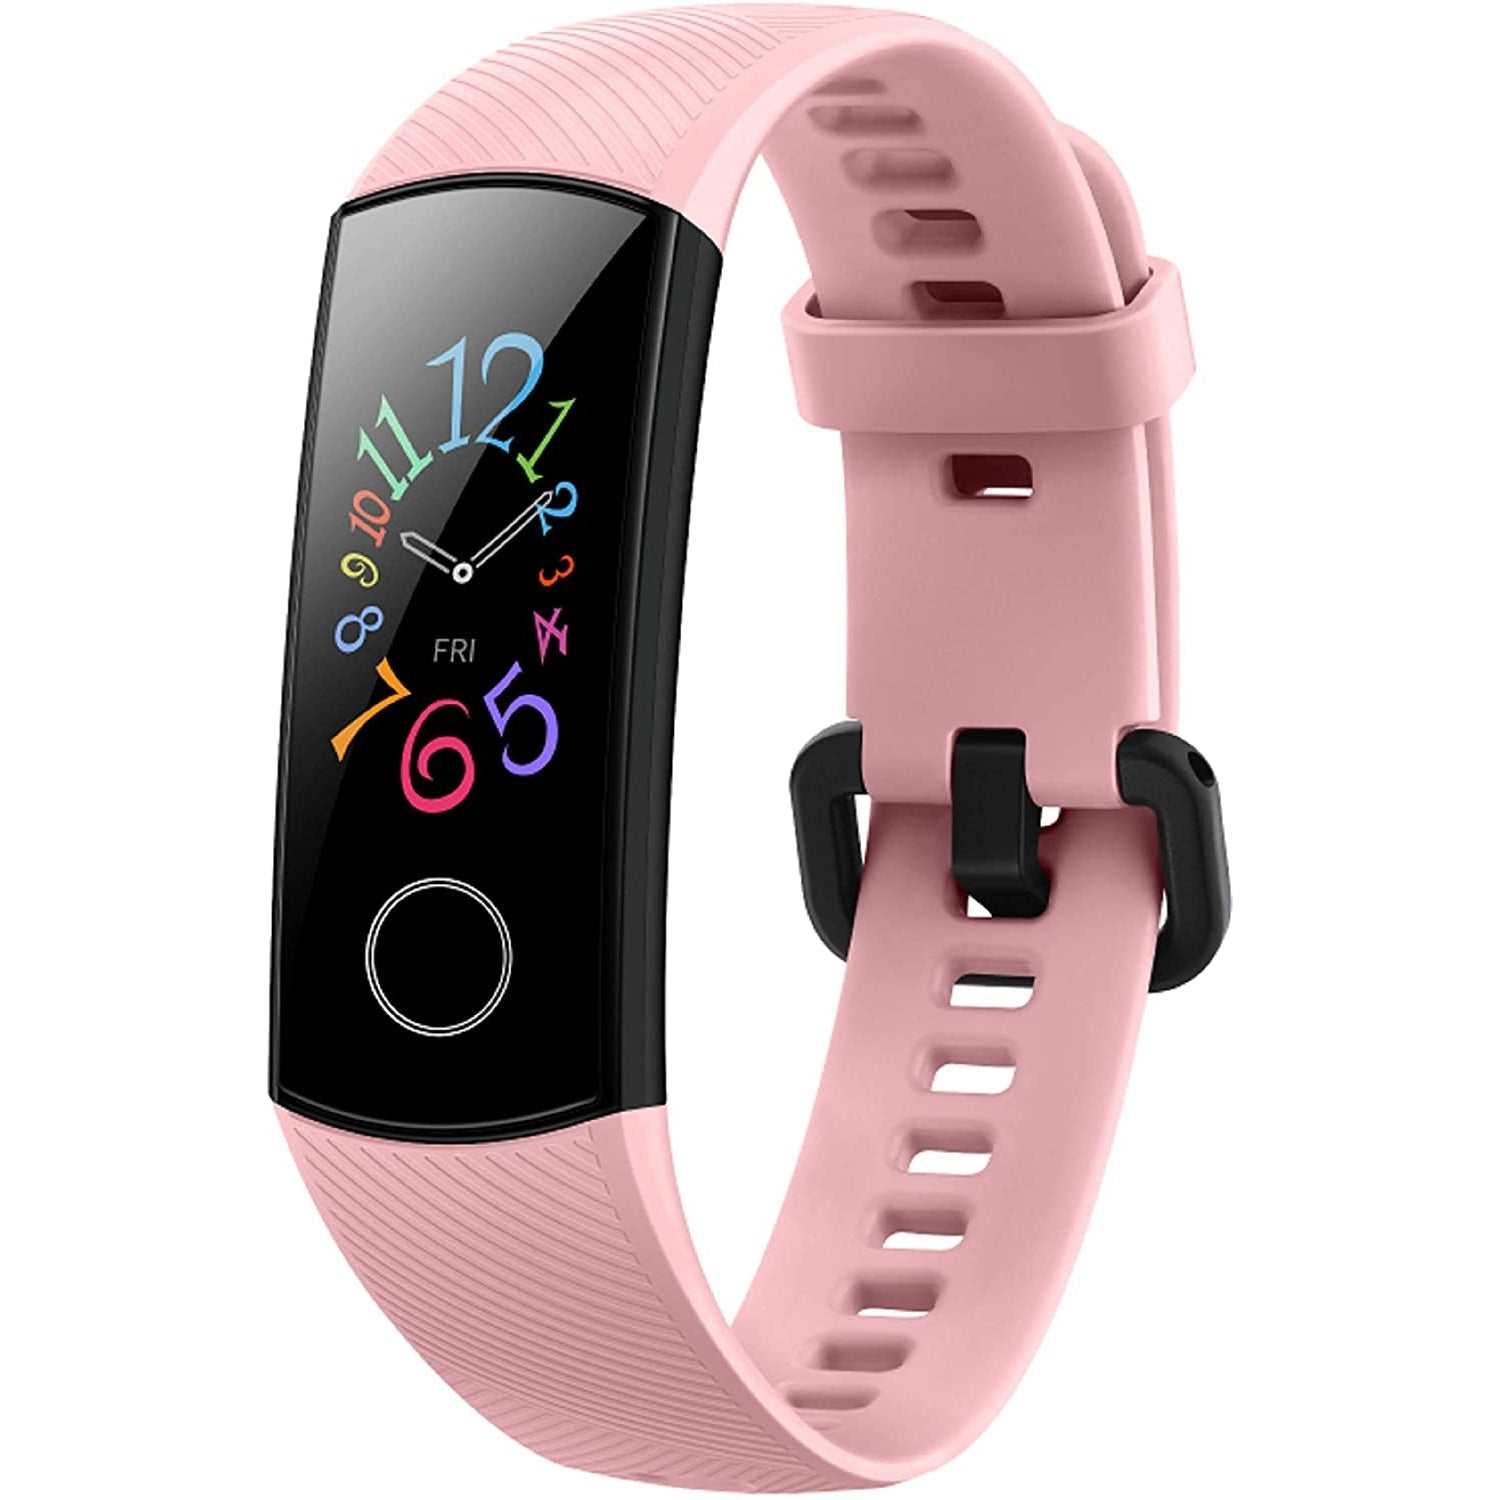 HONOR Band 5 Fitness Tracker with SpO2 Heart Rate and Sleep Monitor - Coral Pink - Refurbished Good